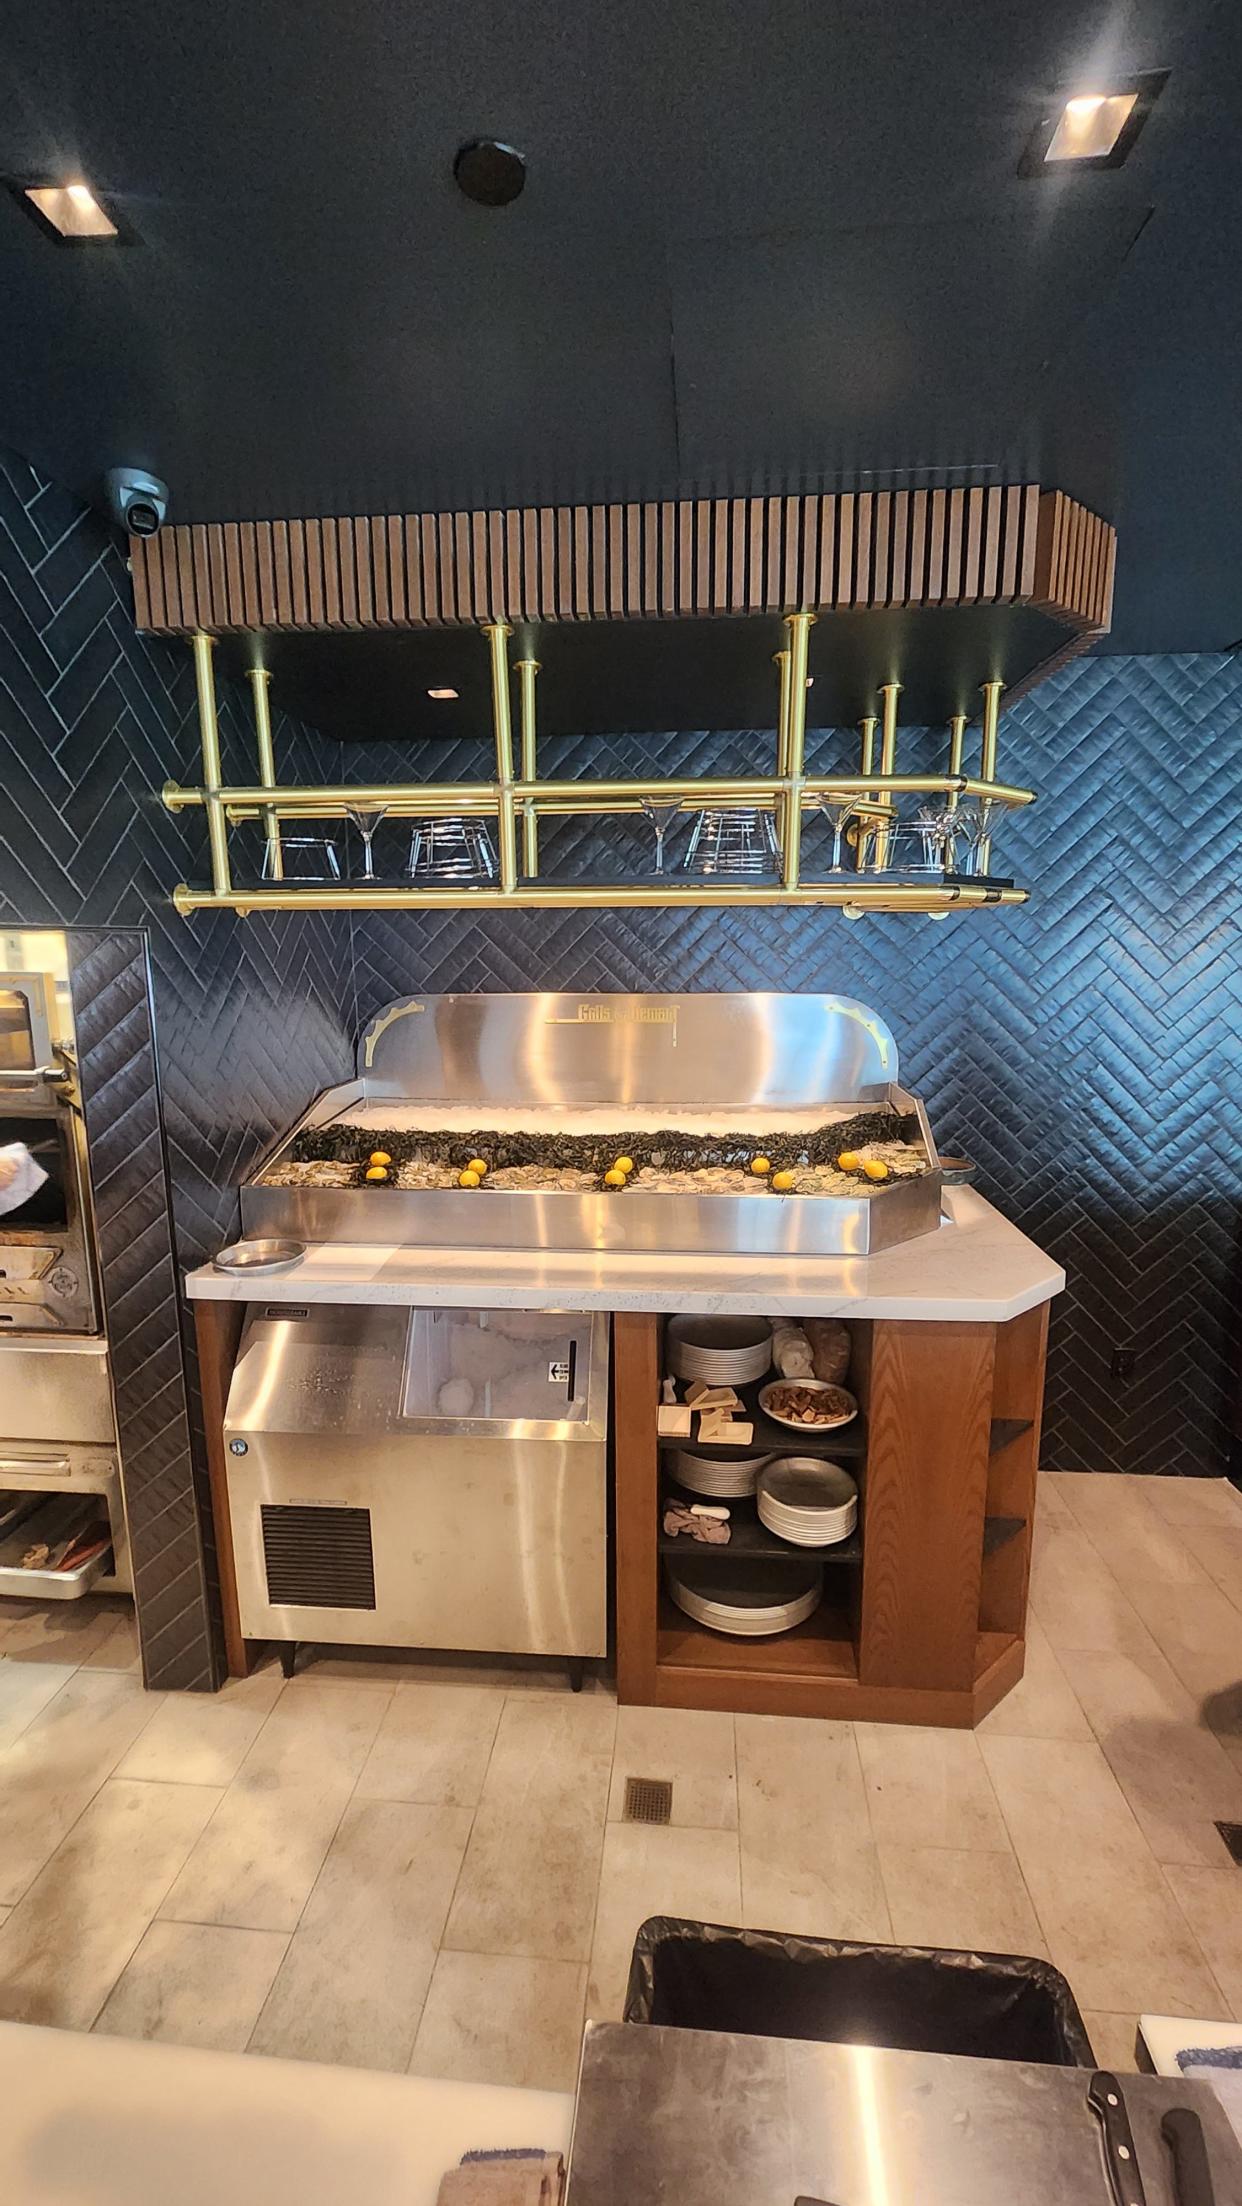 Grills by Demant built the oyster bar at Prime & Providence, the new steakhouse from Dominic Iannerelli and Cory Gourley in West Des Moines.